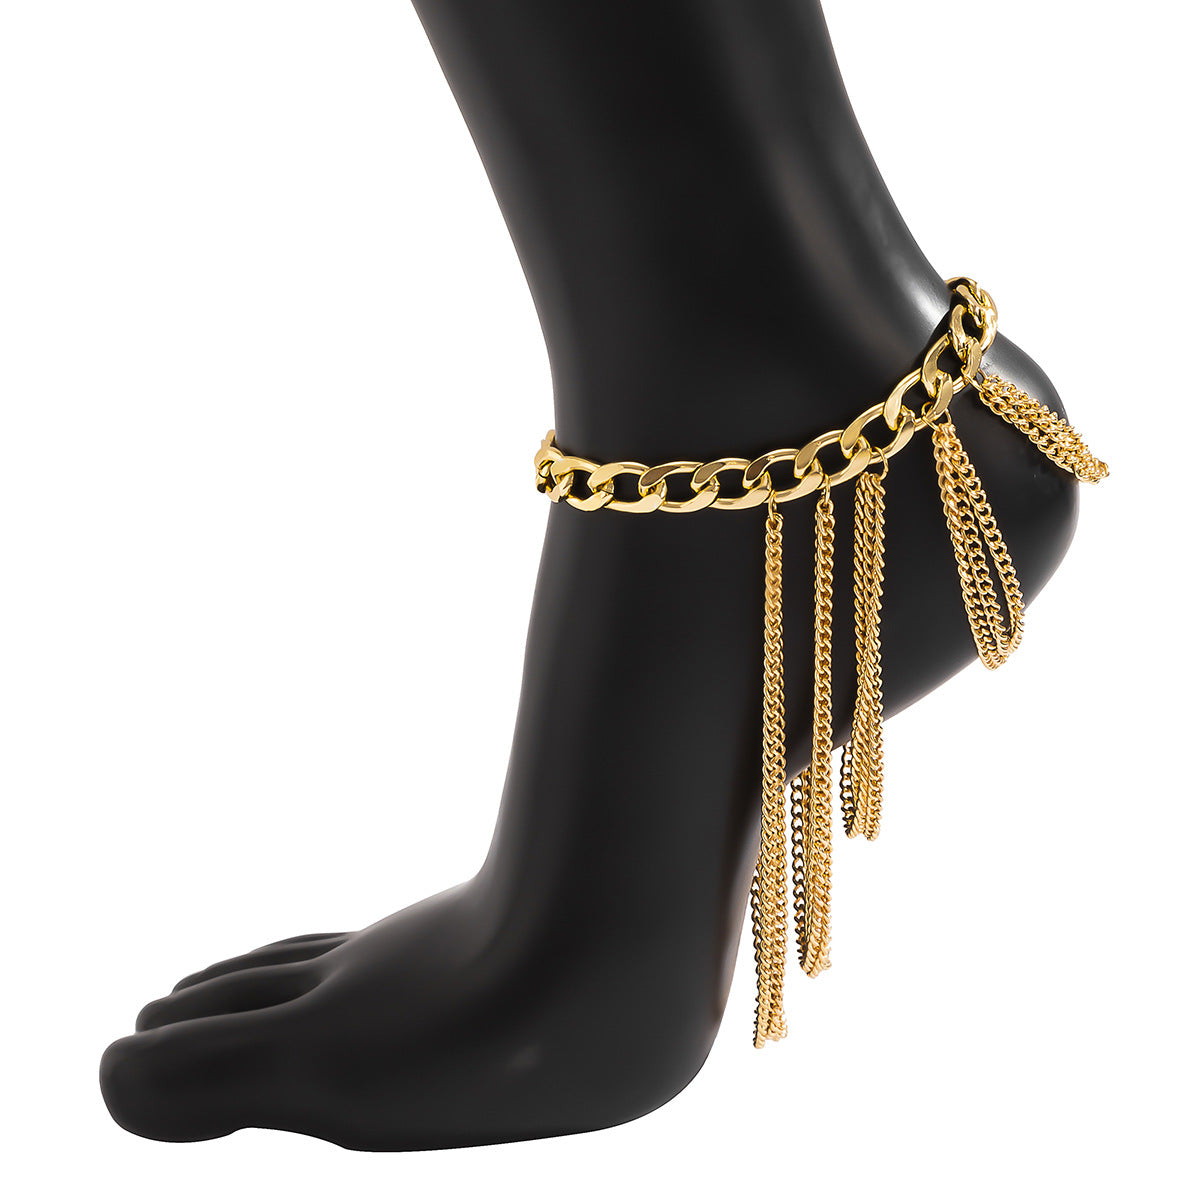 Gorgeous Multilayer Chain Heels - Perfect for Women & Girls!